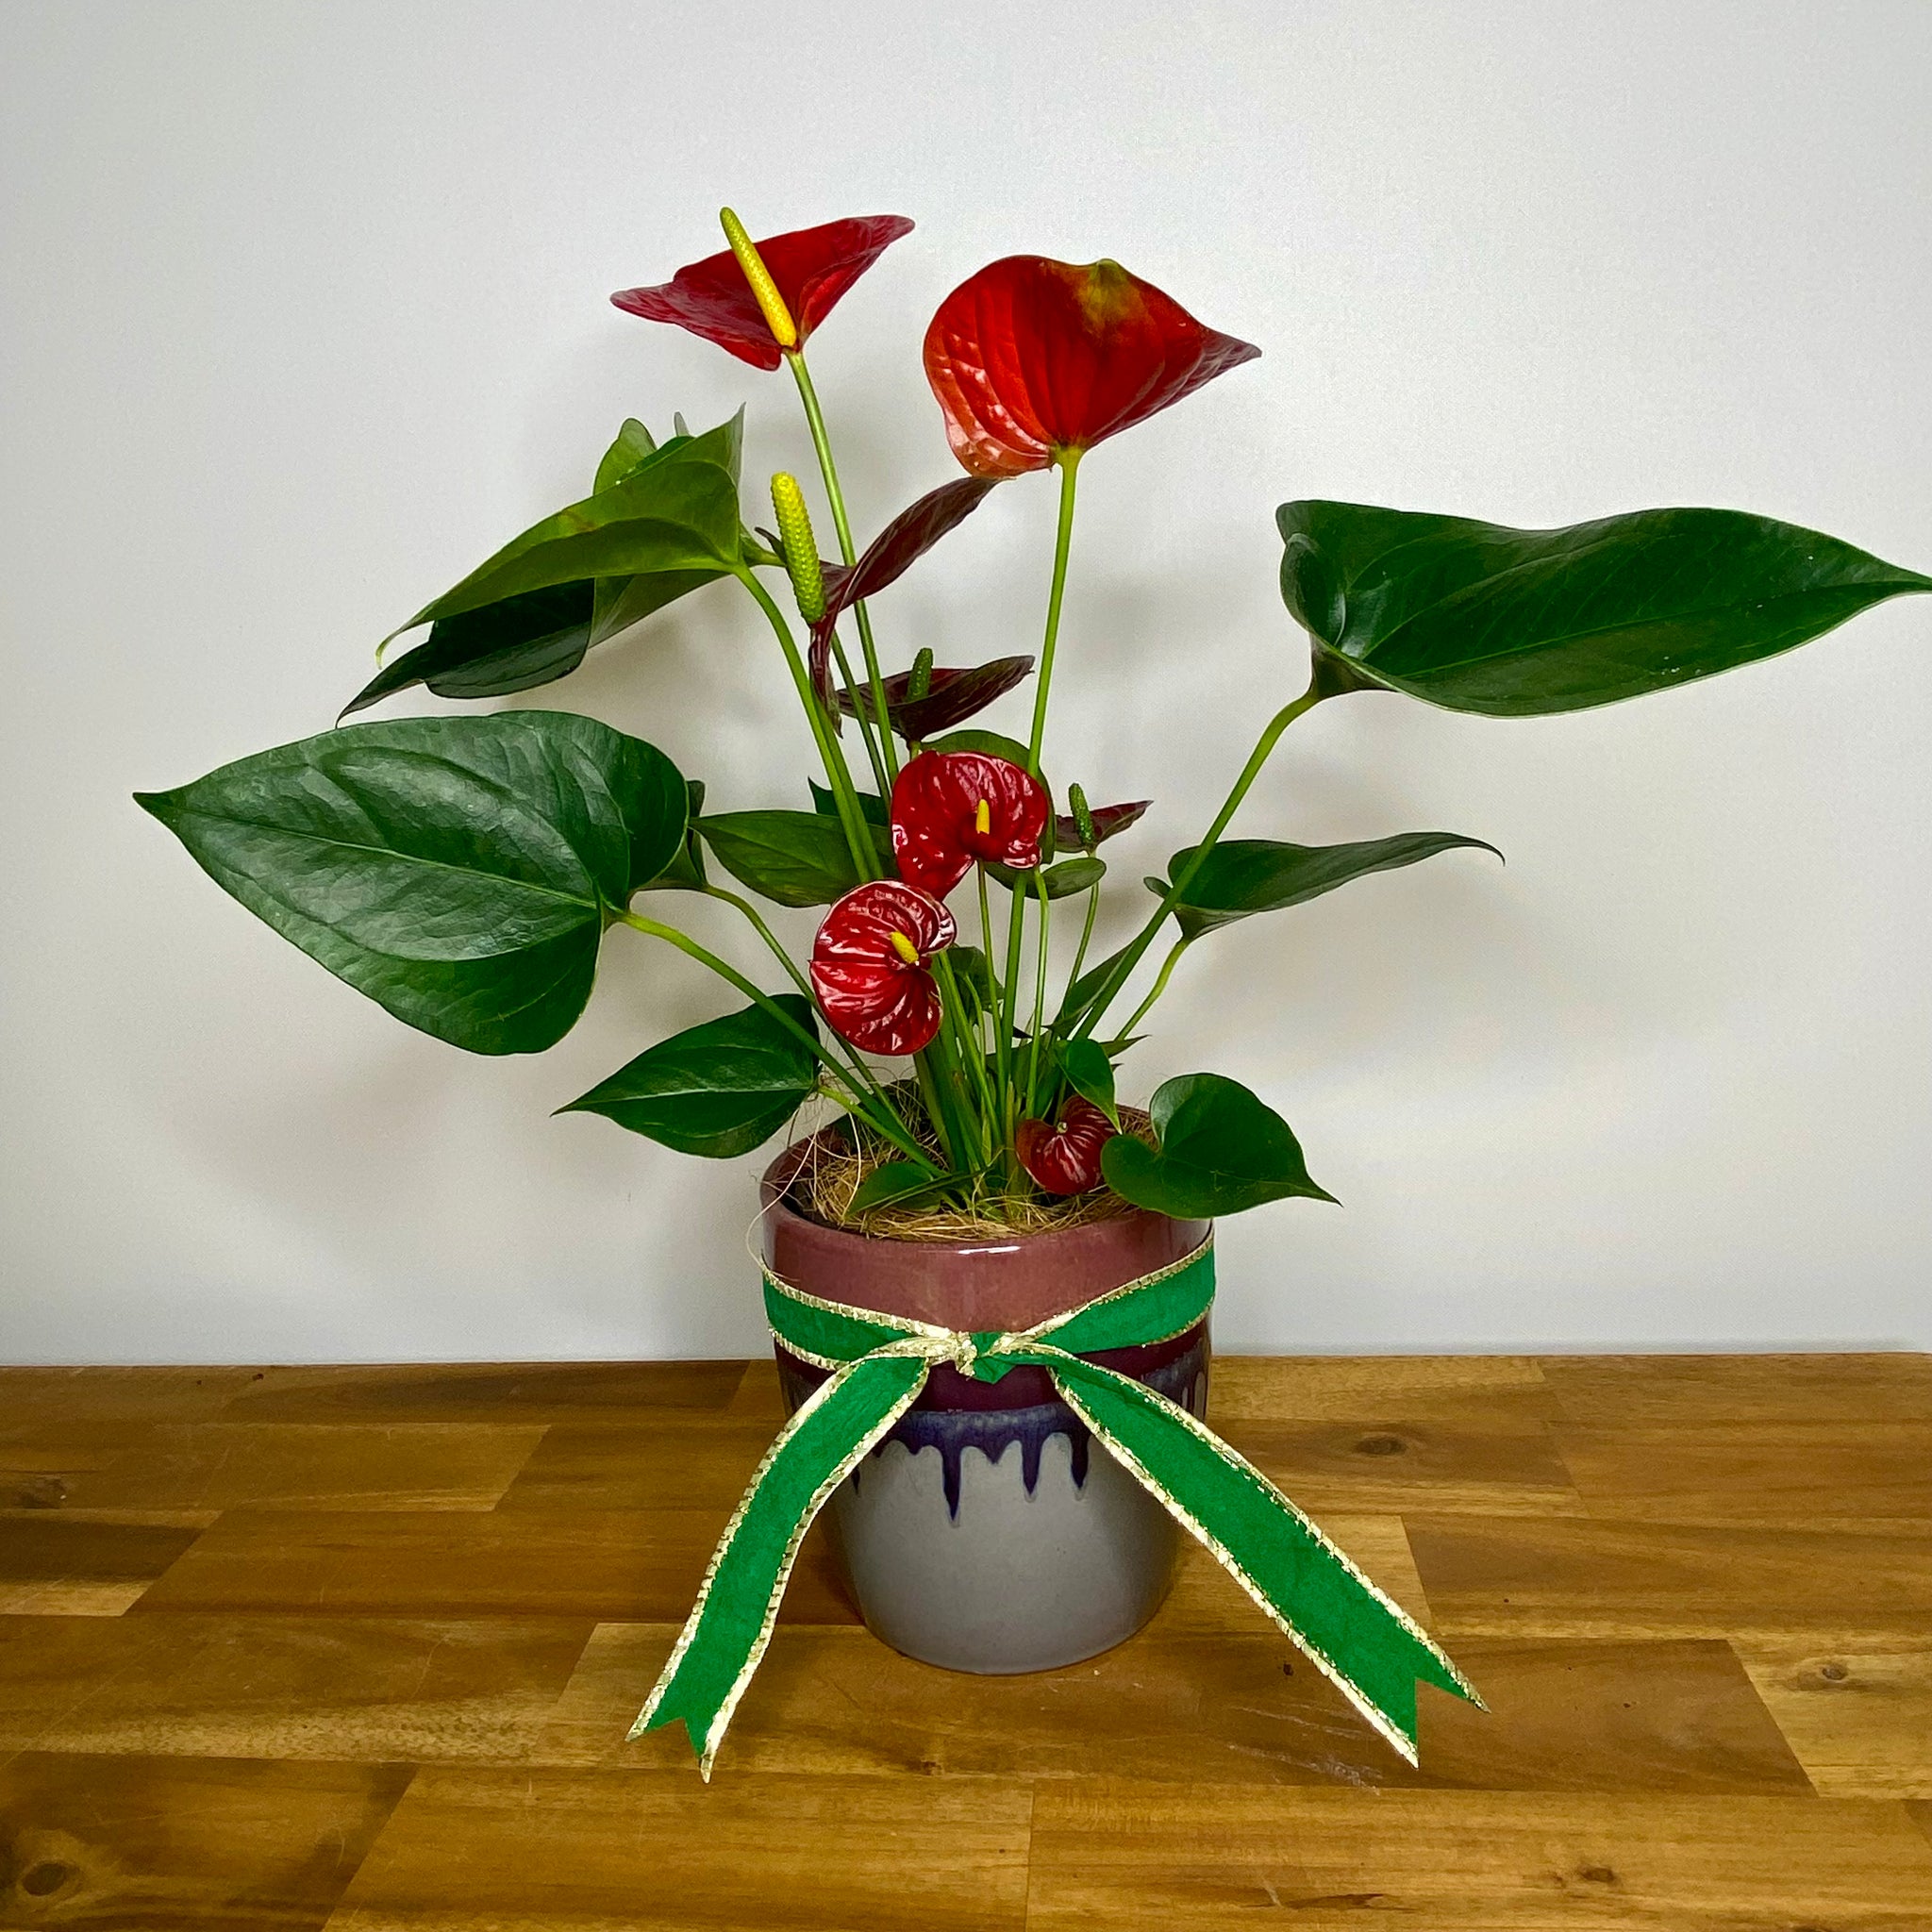 Anthurium with Red Flowers with Brown/Blue Ceramic Pot